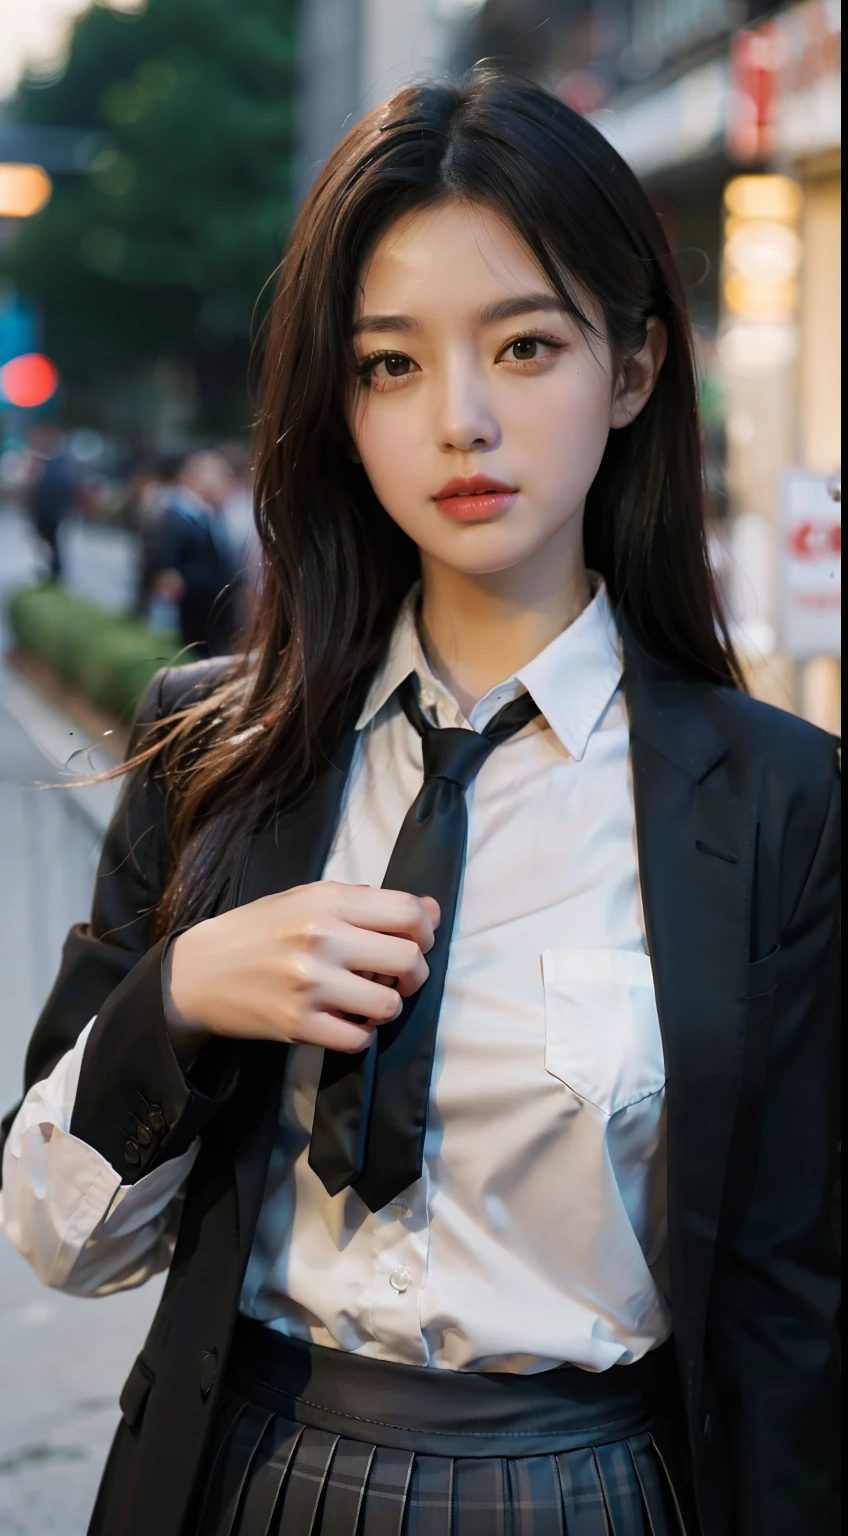 best quality, masterpiece, 1 girl, beautiful face, (photo photo:1.3), edge lighting, (high detail skin:1.2), 8k ultra hd, DSLR, high quality, high resolution, 4k, 8k, bokeh, absurd, best ratio four fingers and one thumb, (realistic:1.3), cute 1girl, wearing black formal blazer, medium breasts, white shirt, black tie, pleated skirt,